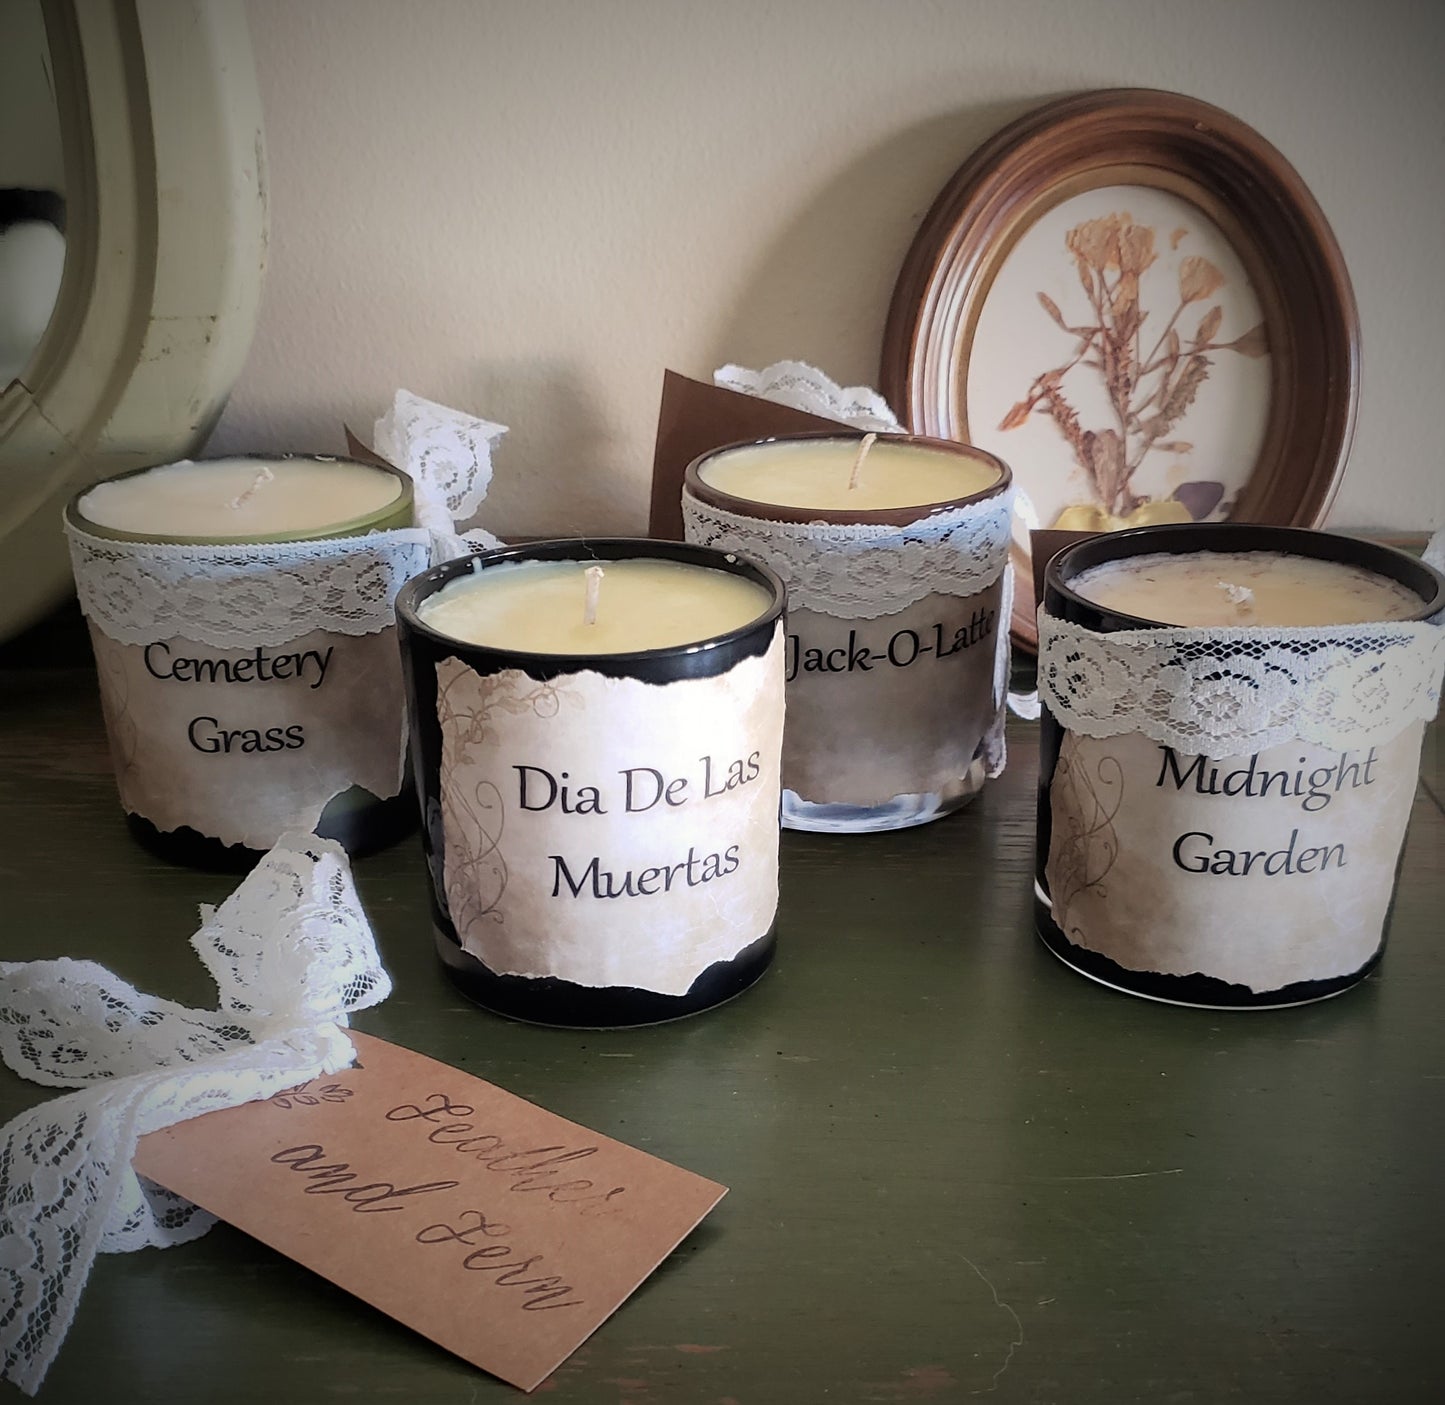 "Momento Mori" Soy Candle With Hand Torn Label, Rose and Sandalwood